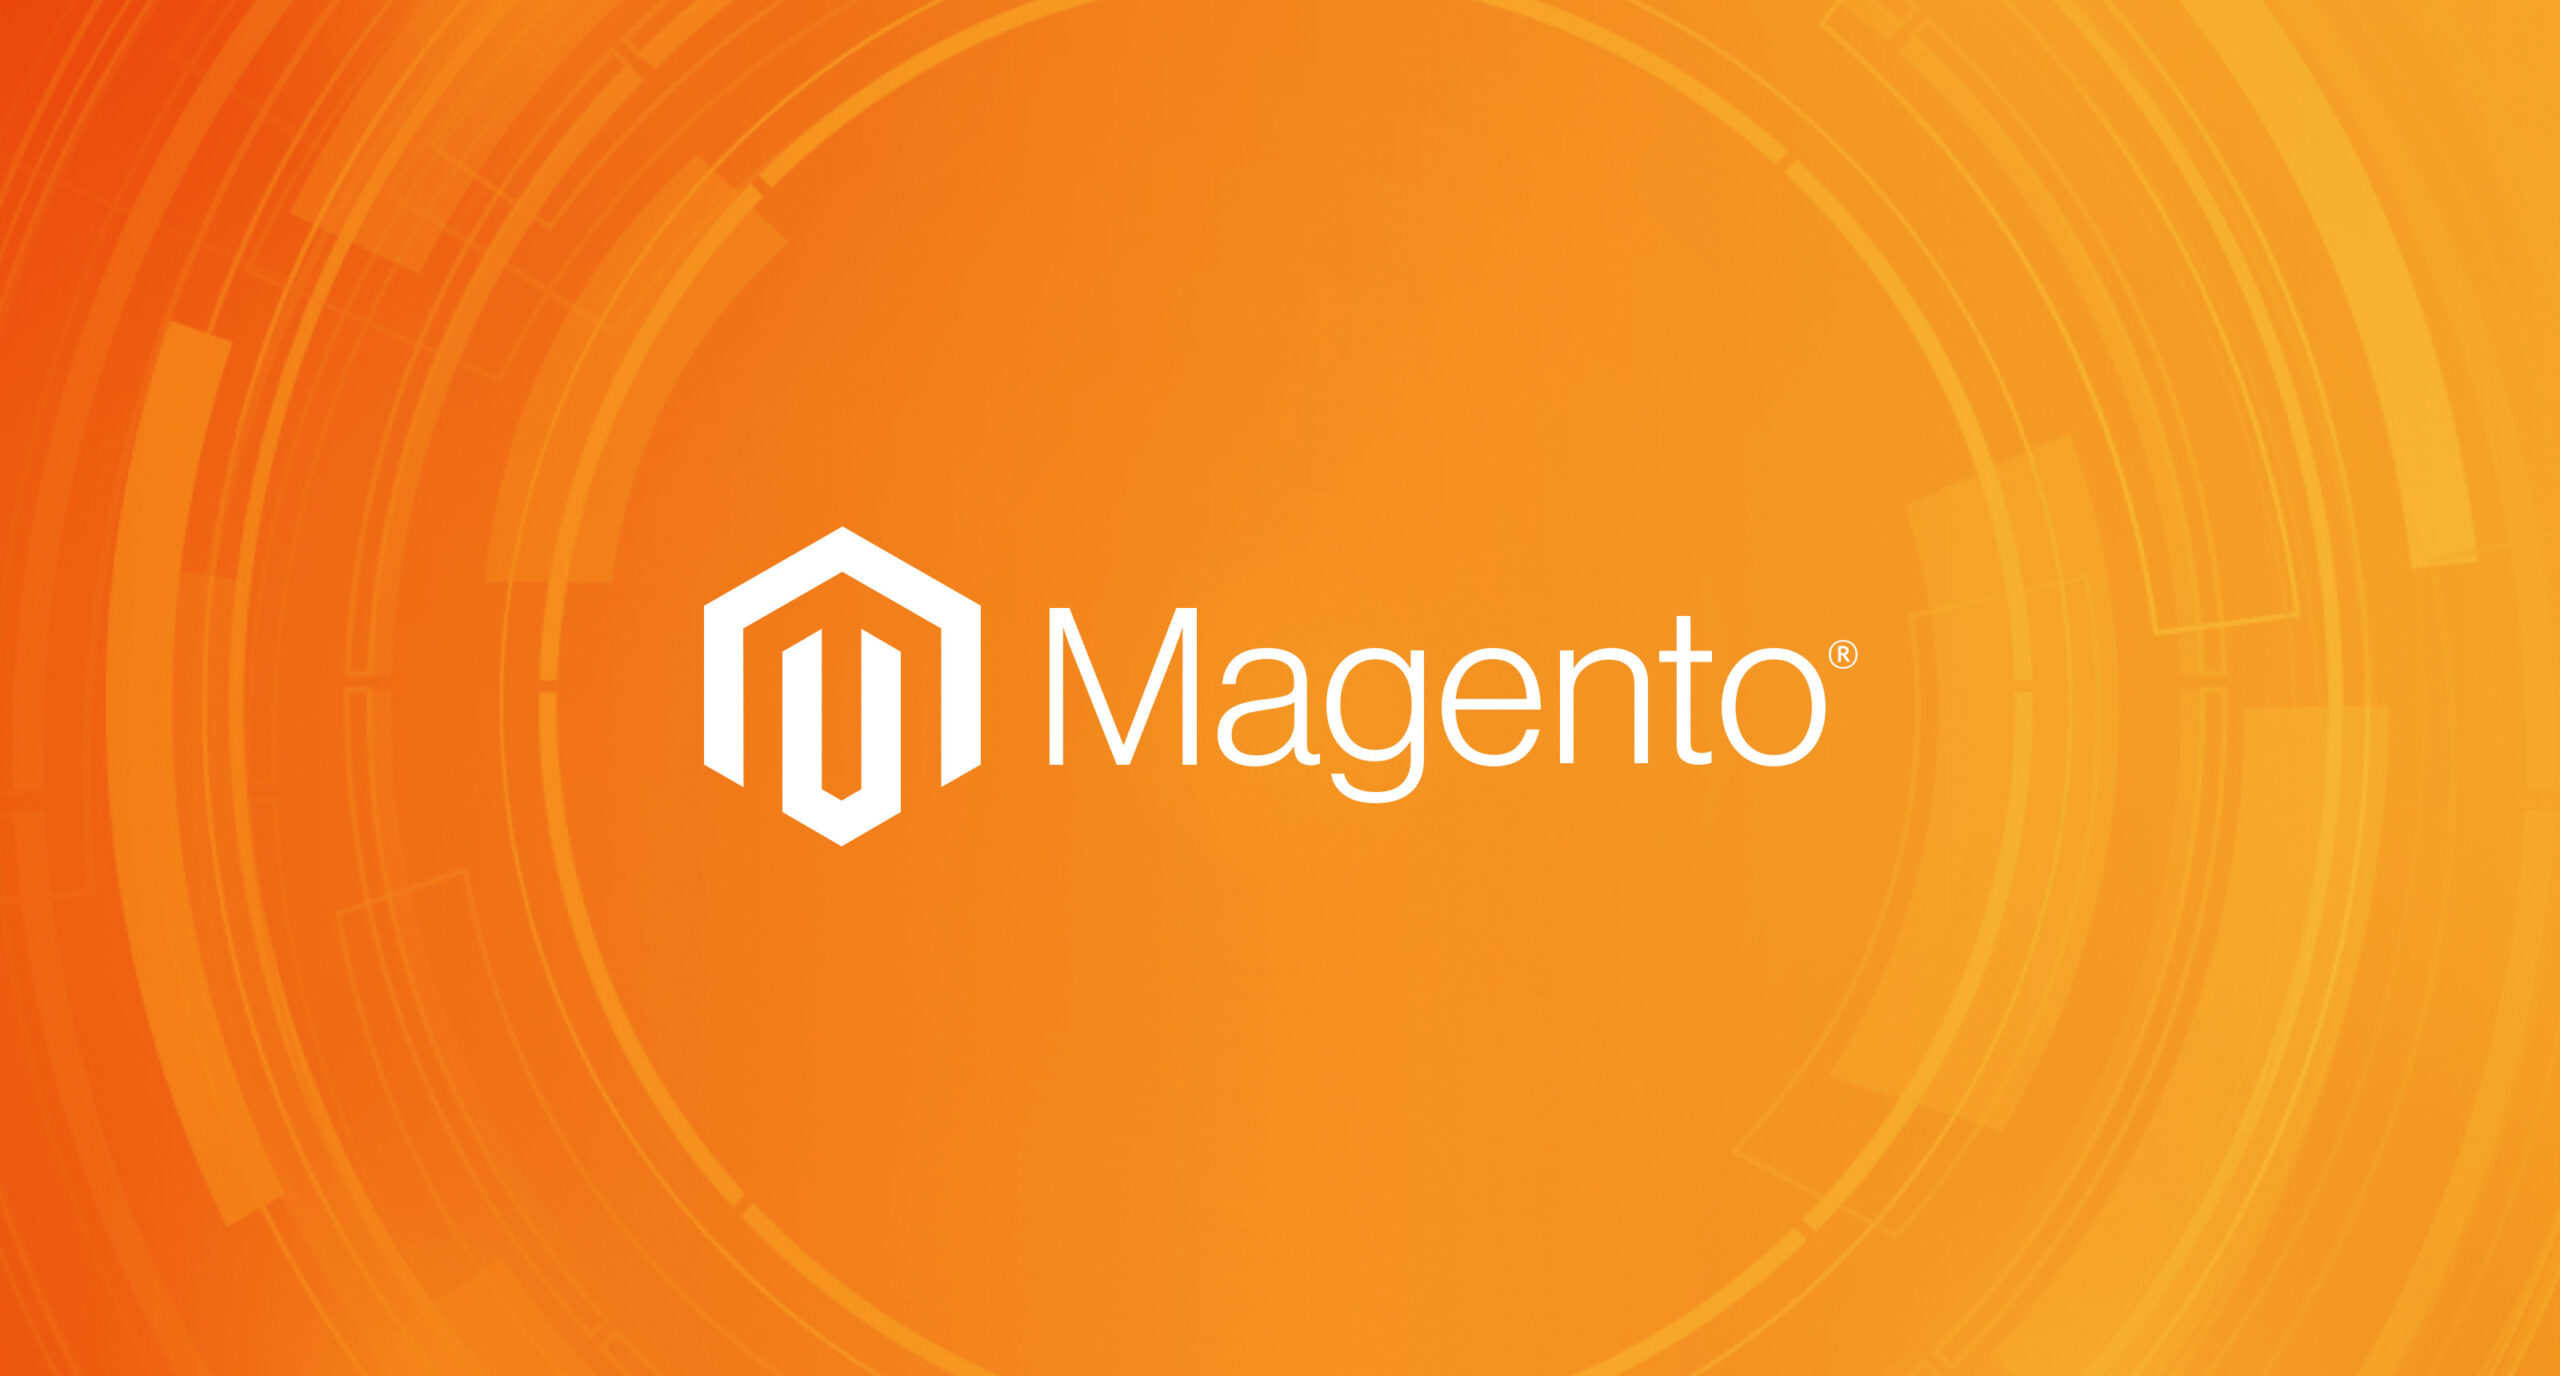 121eCommerce Achieves Specialization in Adobe Magento Commerce